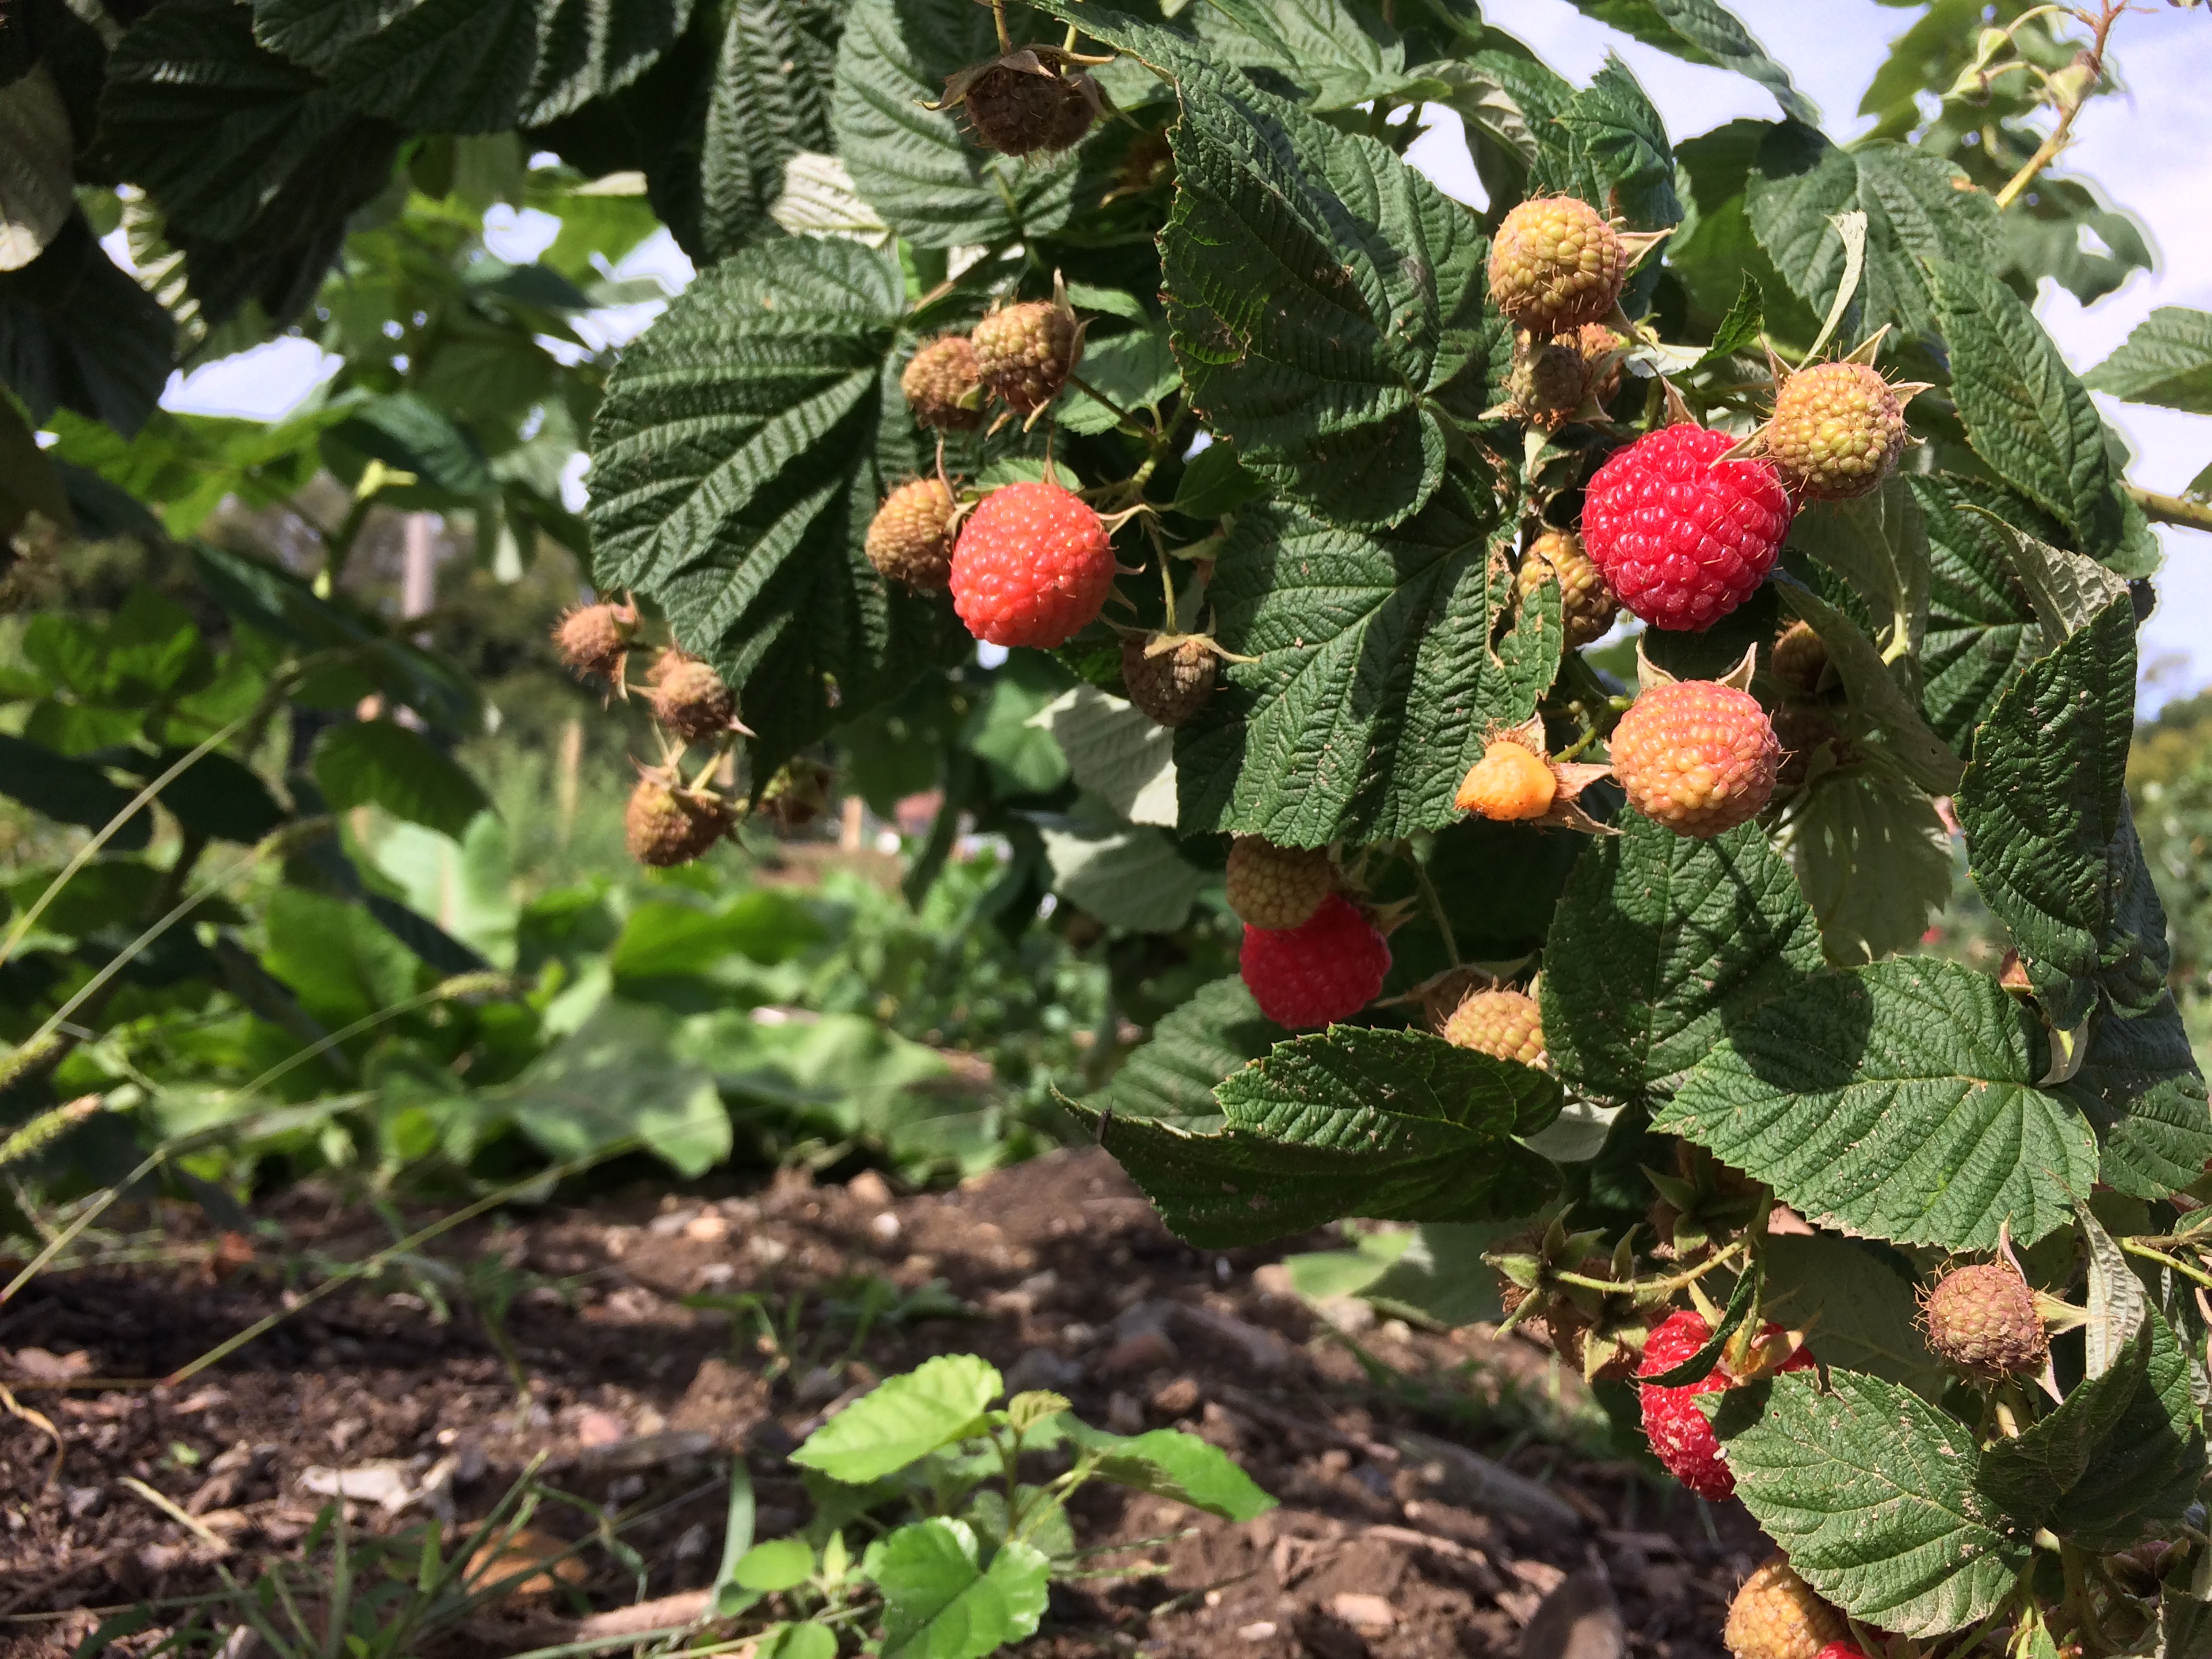 Ask an expert: Neighbor's spraying could affect growth, yield of raspberries